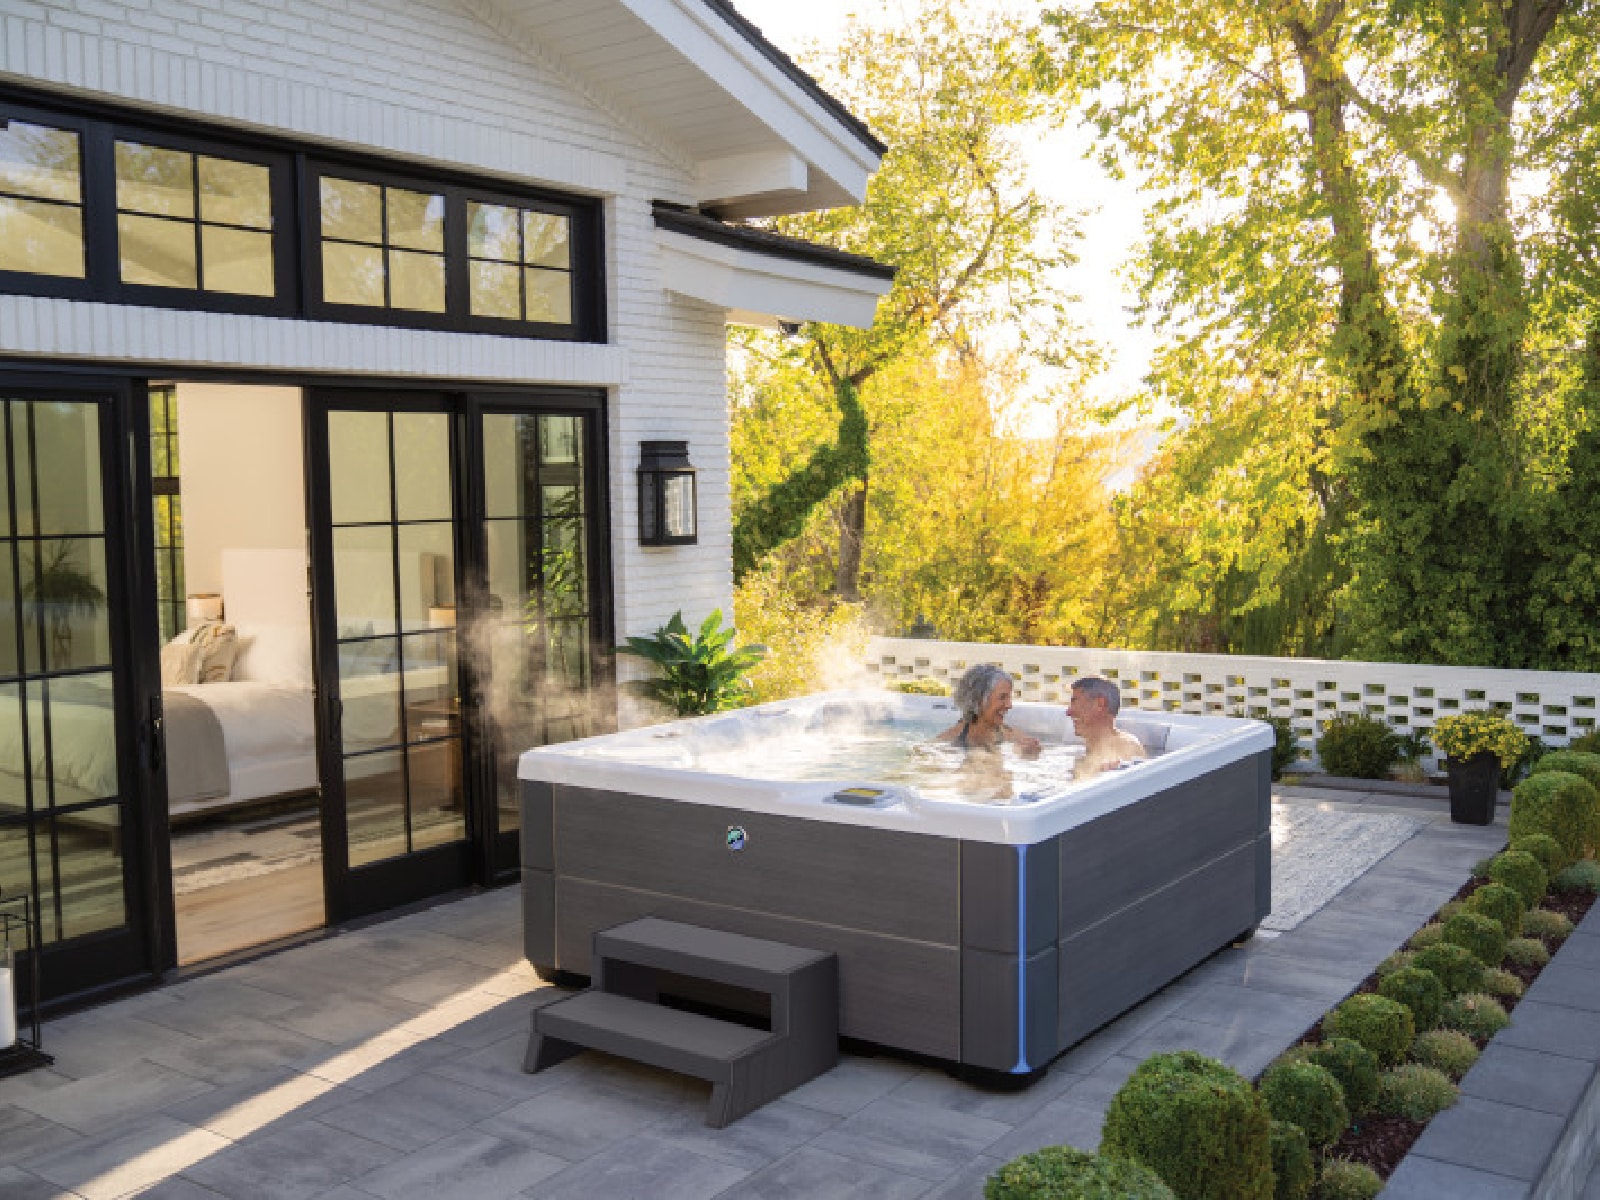 How Much Energy Do Hot Spring Hot Tubs Use? | Texas Hot Tub Company